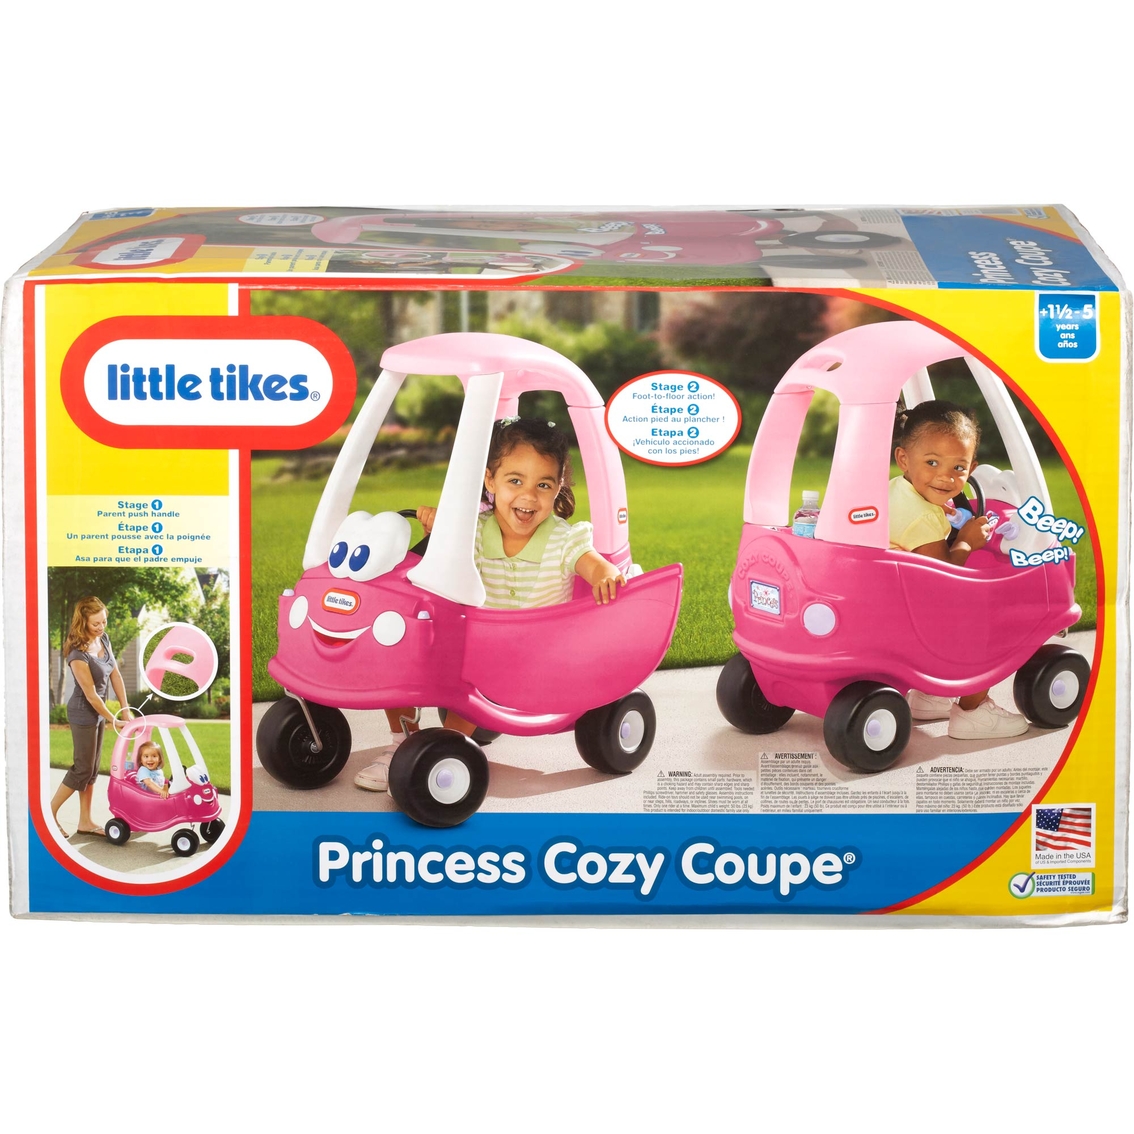 Little Tikes Princess Cozy Coupe - Image 3 of 3